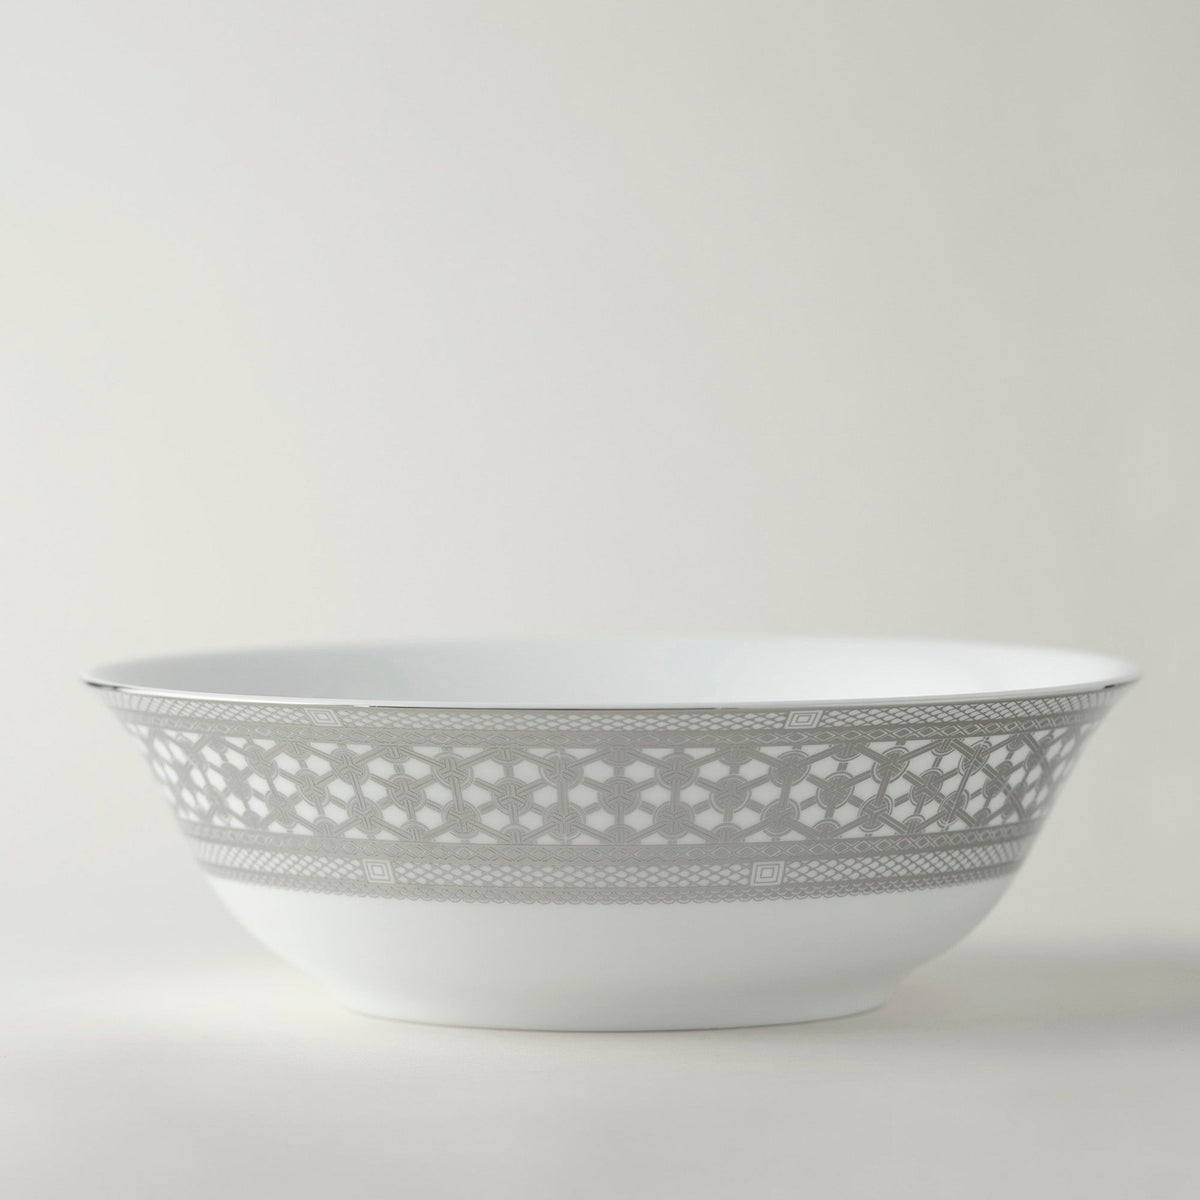 A Hawthorne Ice Platinum Medium Serving Bowl with a silver pattern on it, perfect for serving meals or displaying decorative items. (Brand Name: Caskata Artisanal Home)